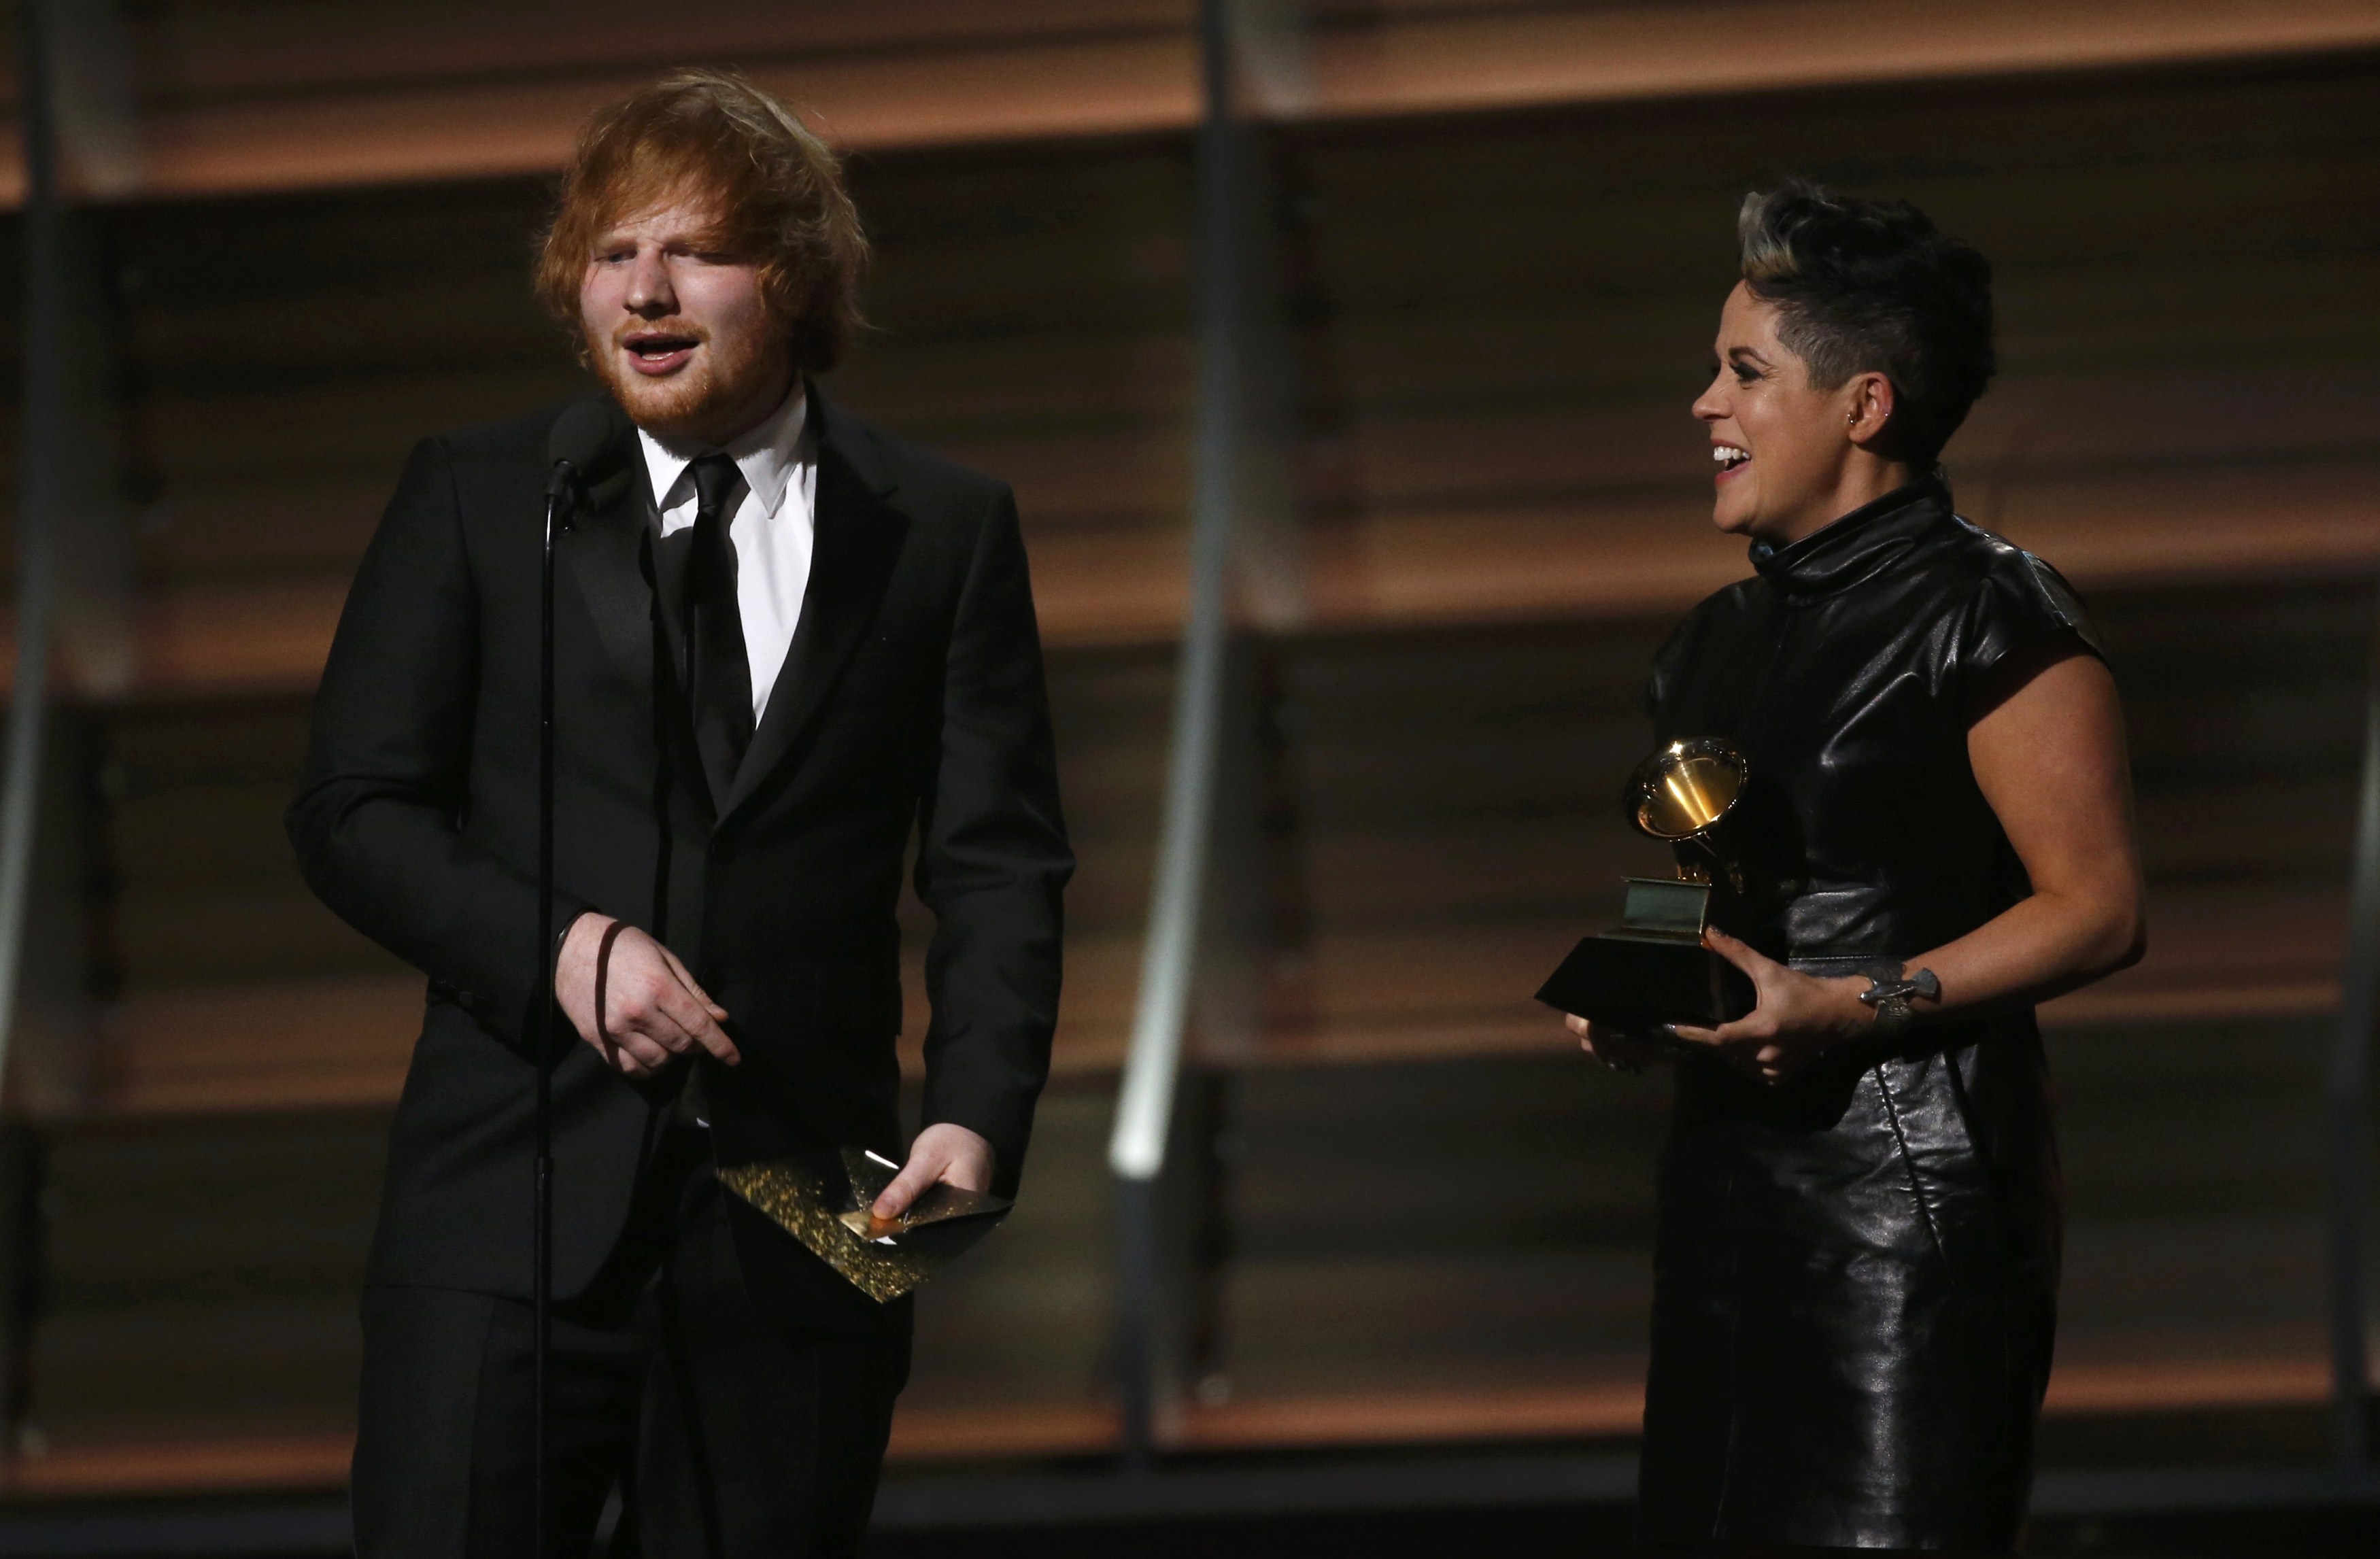 Sheeran bests Lamar for Grammy song of the year, Rihanna cancels